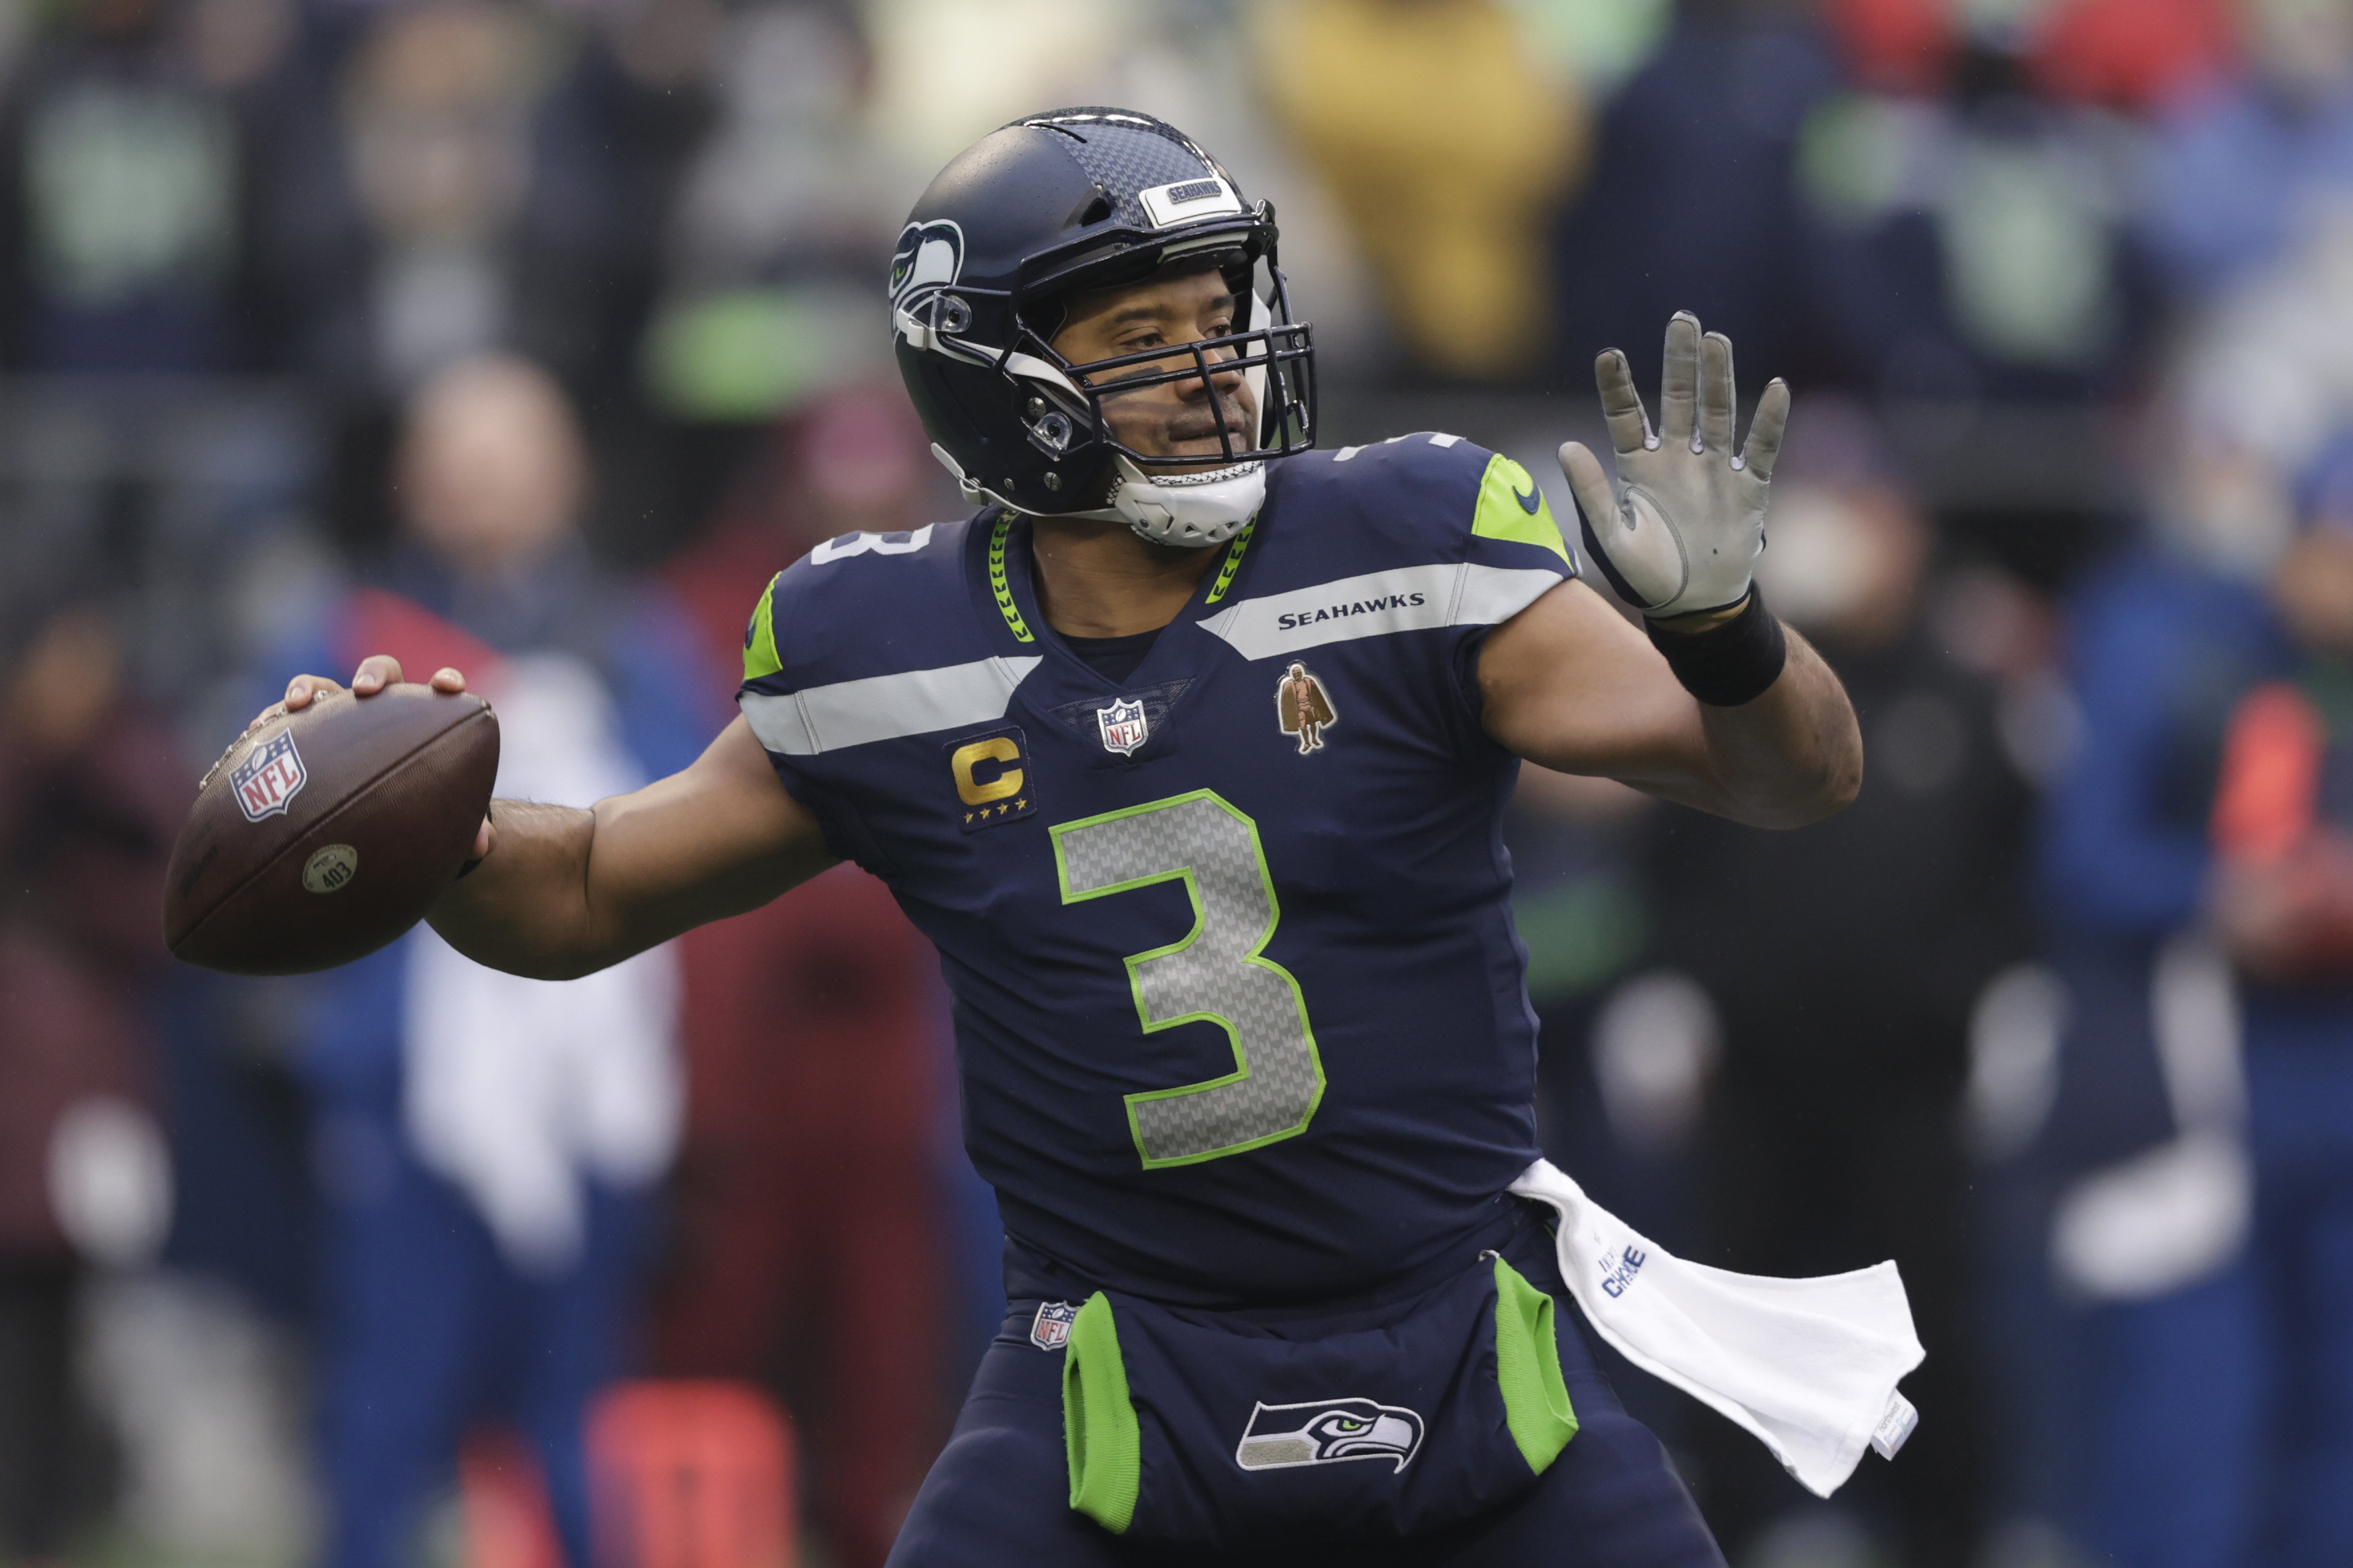 Denver Broncos: Russell Wilson was predicted to be 5th best QB